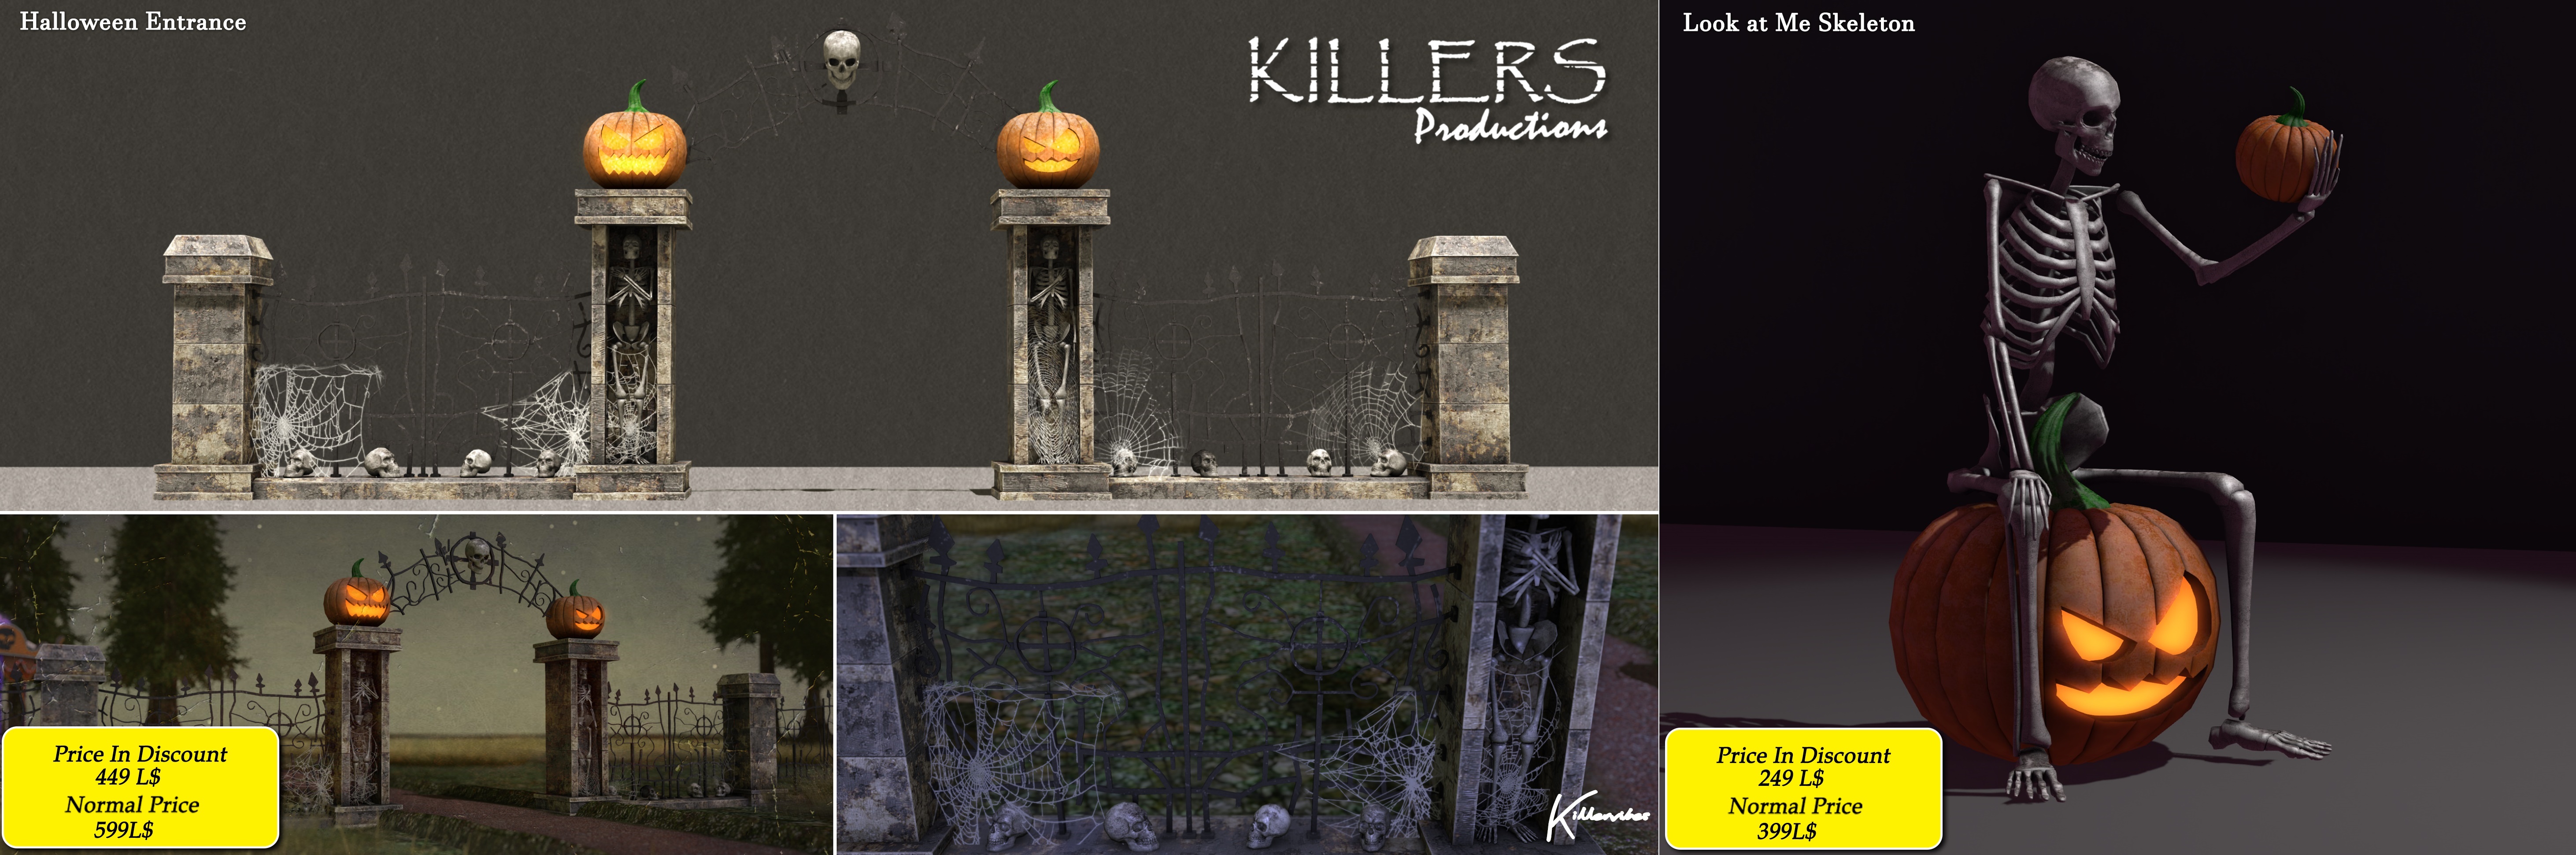 Killers Productions – Halloween Entrance & Look At Me Skeleton